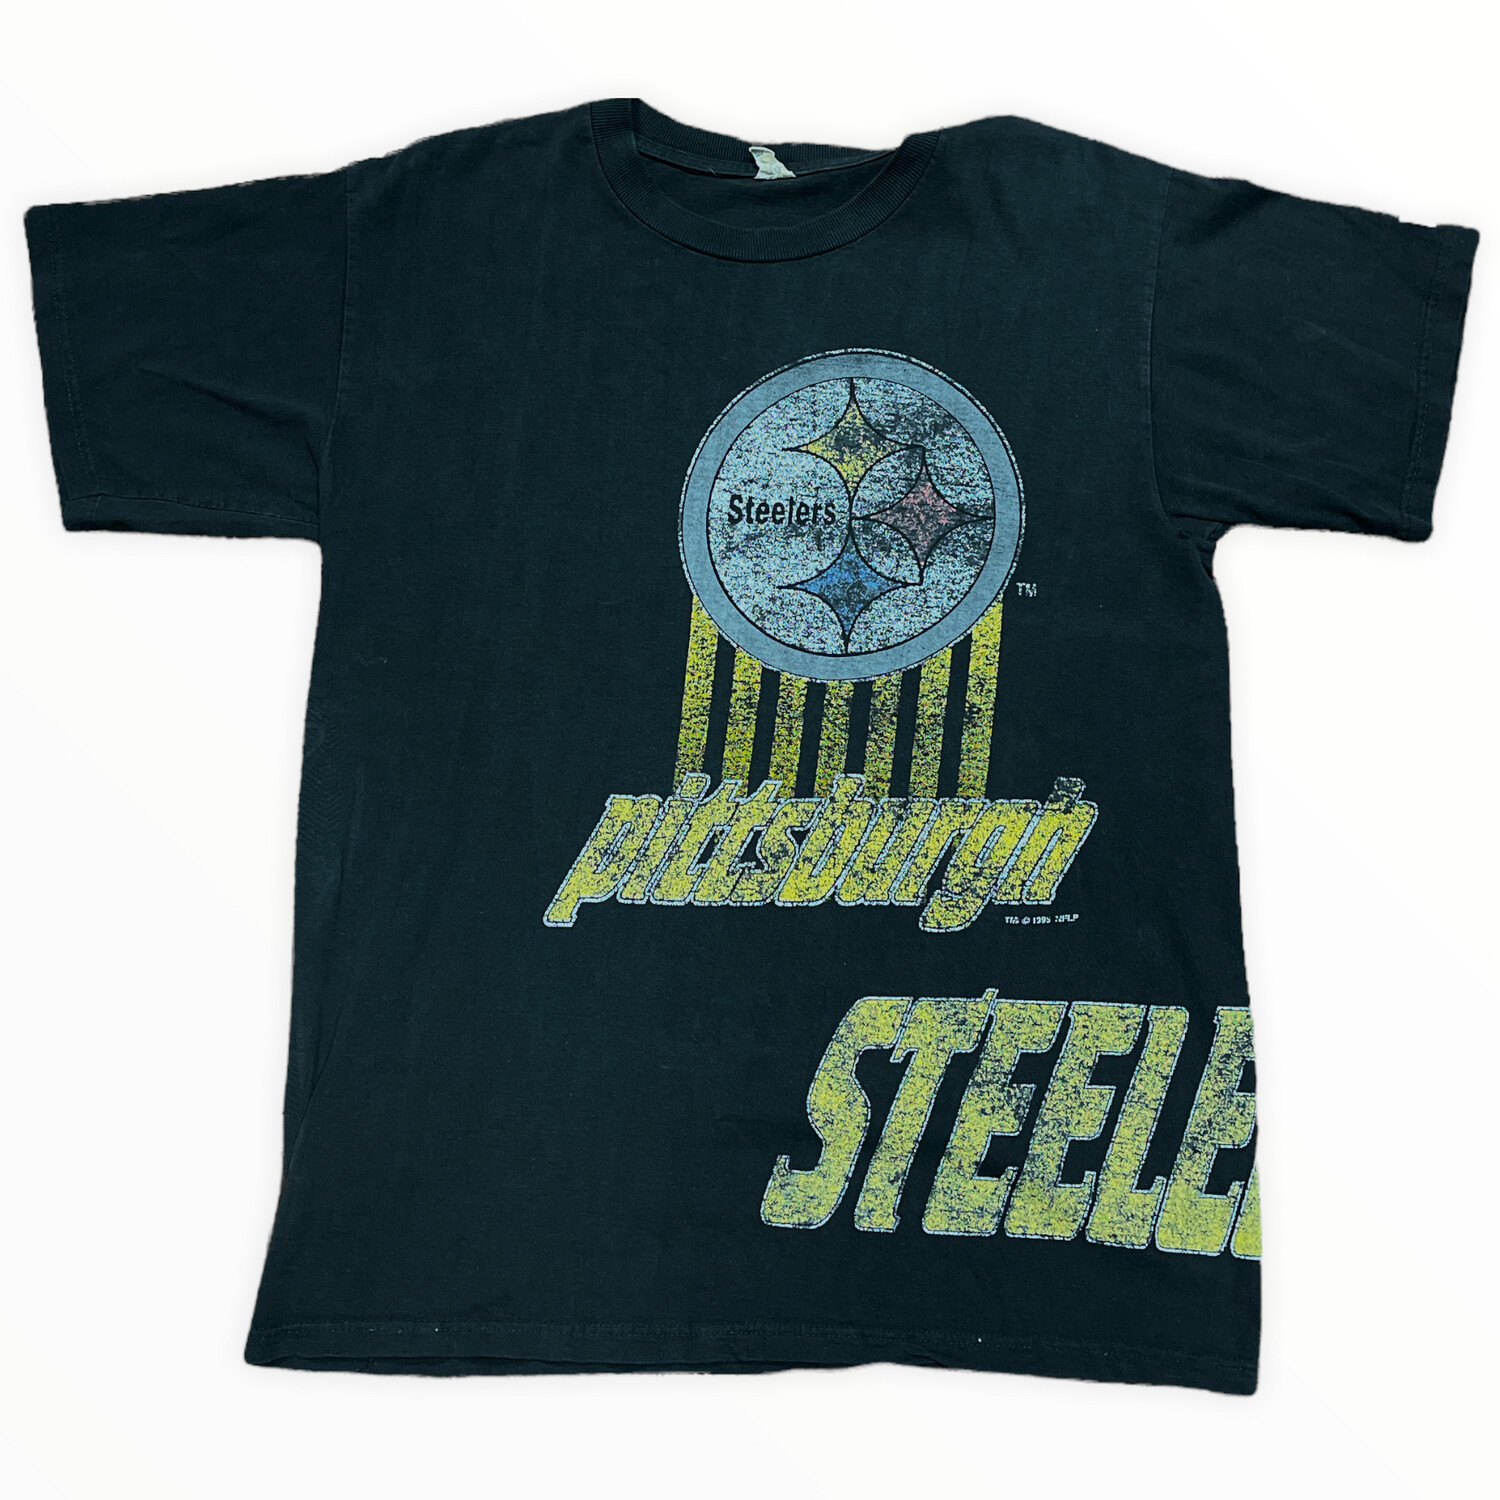 Vintage 1995 Pittsburgh Steelers Tee, Size: Large, Color: Black, Style: Pittsburgh